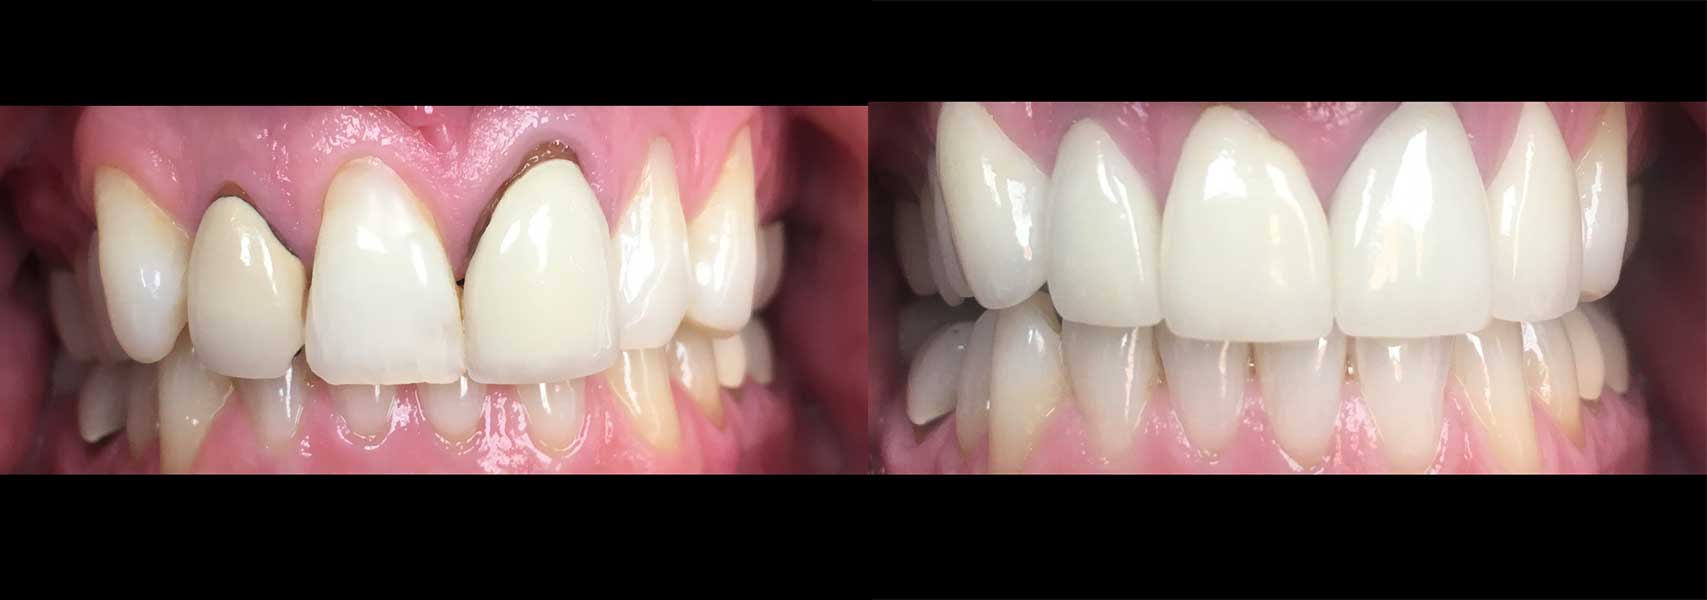 Before & after a dental crown by Grand Dentistry